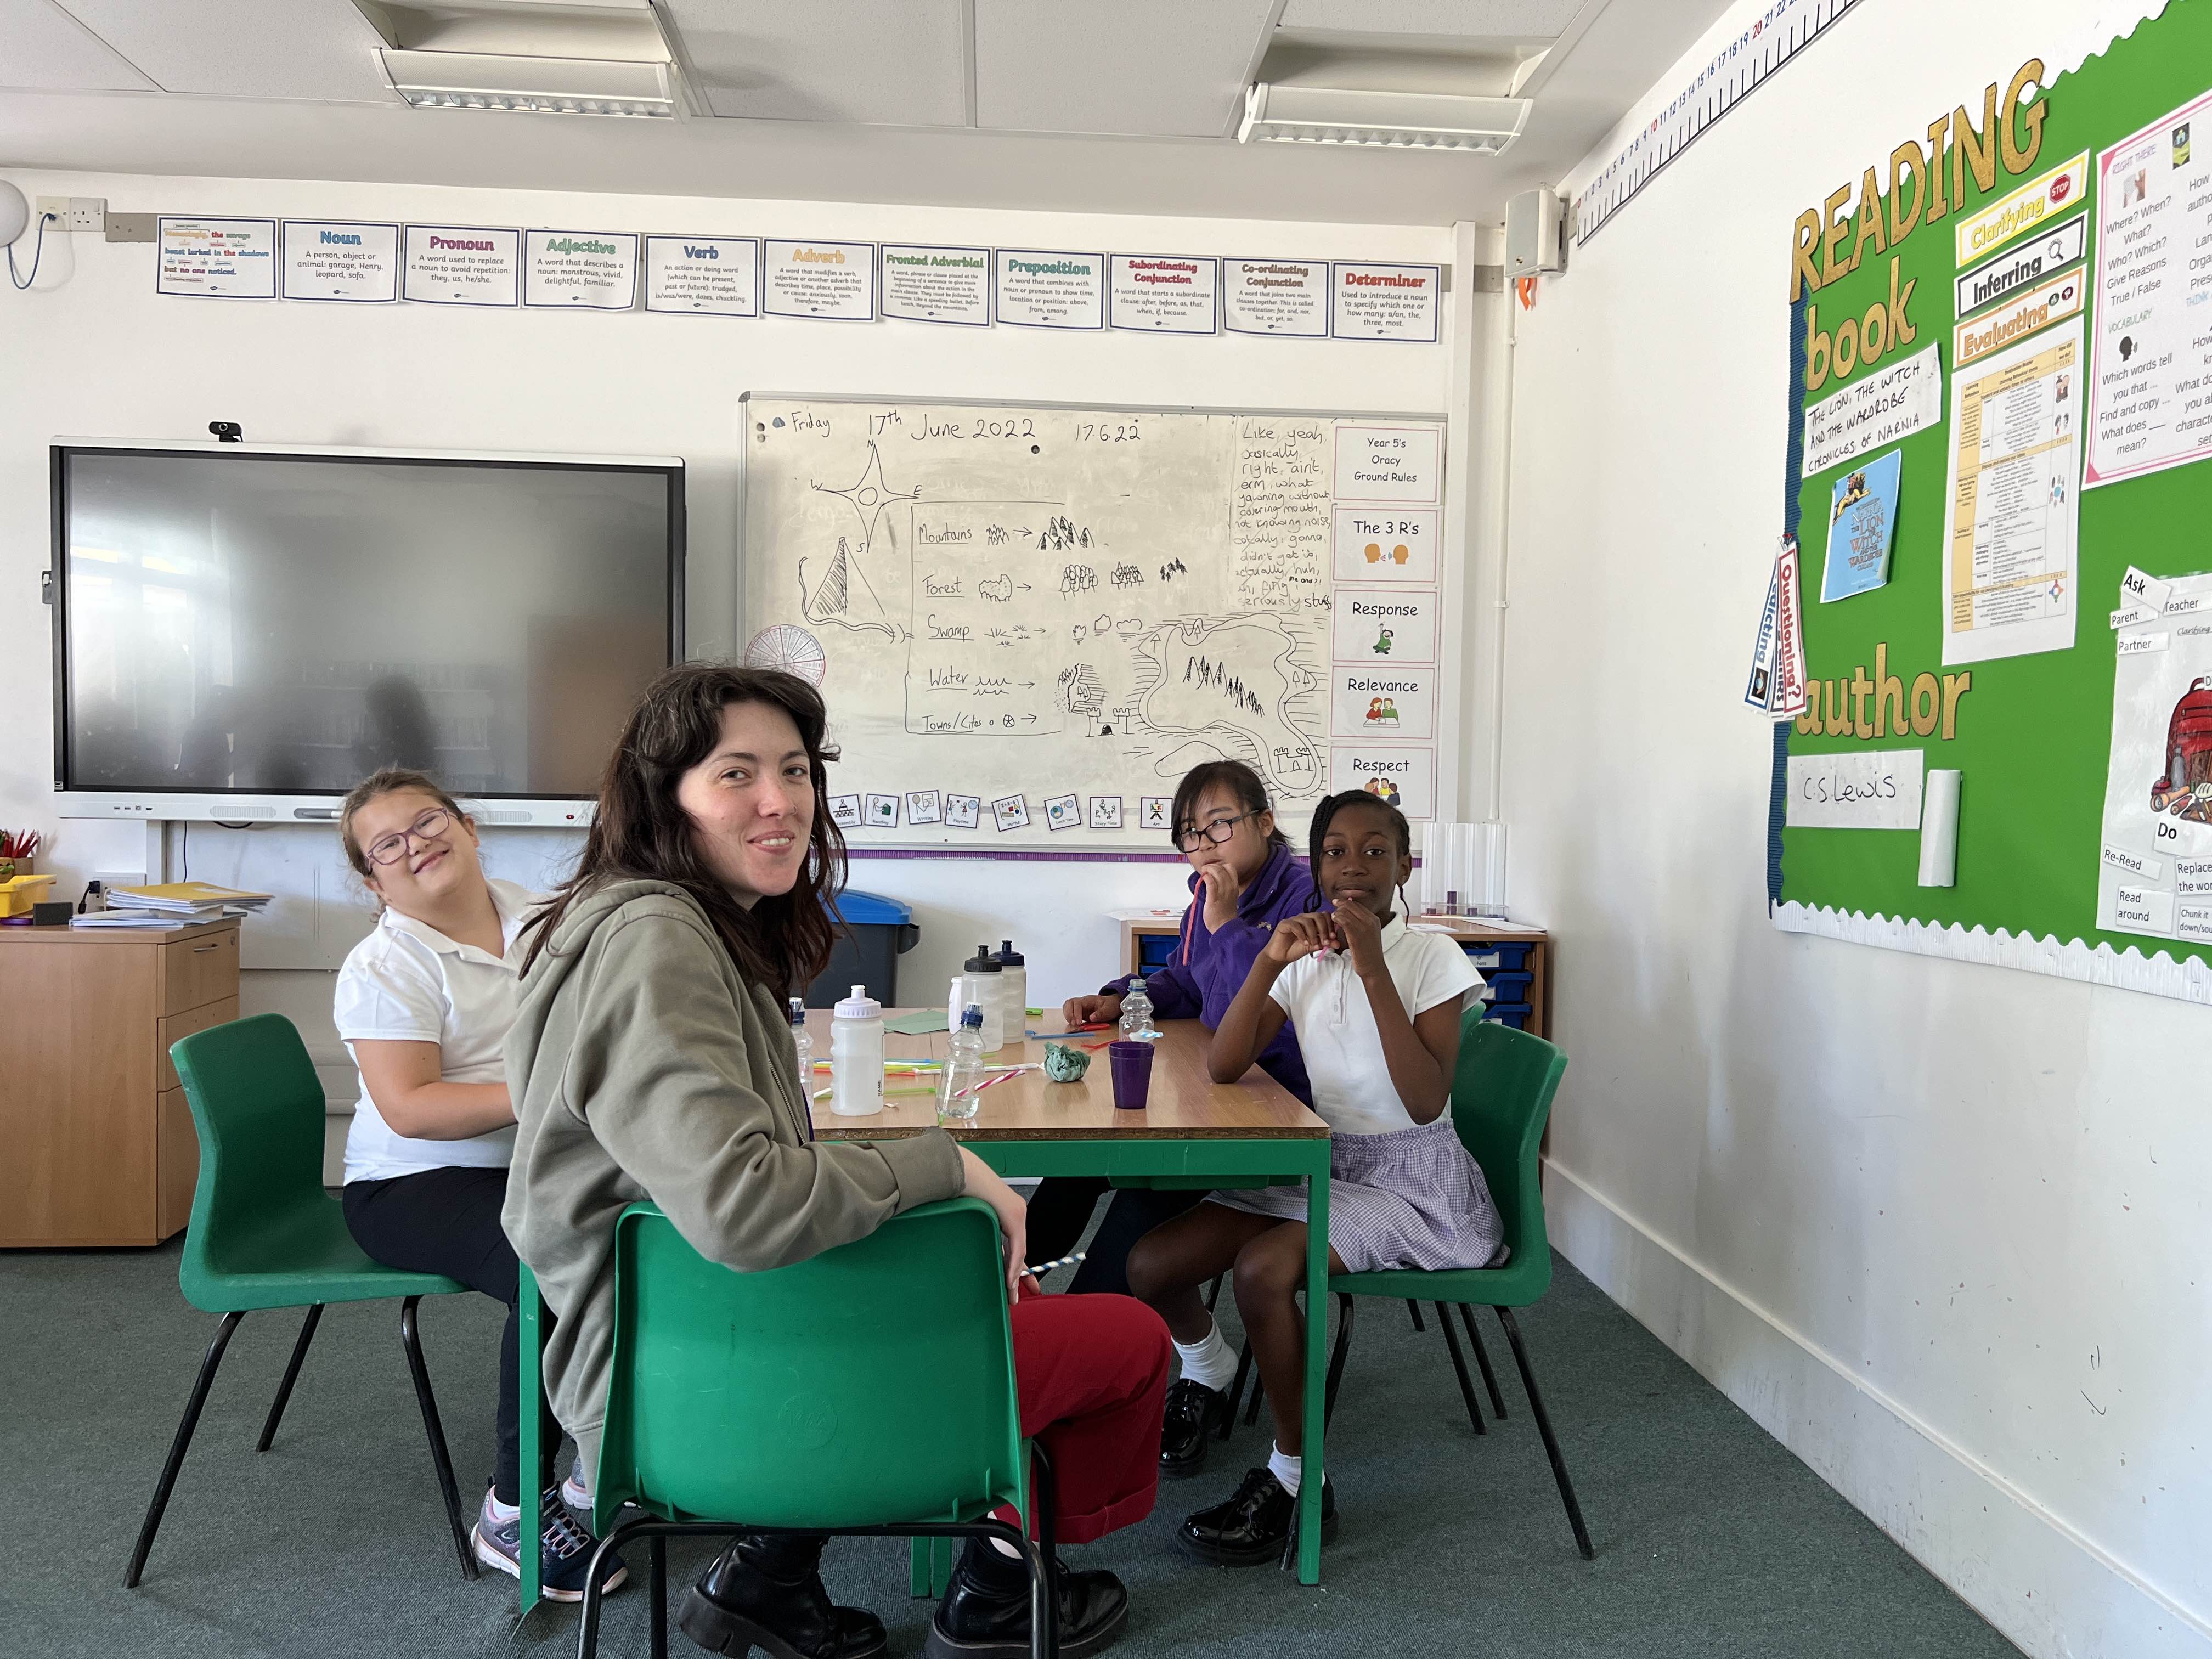 This image shows one teacher and three Year 4 and Year 5 schoolchildren from Ashford Oaks Primary School in Ashford Kent smiling at the camera. 